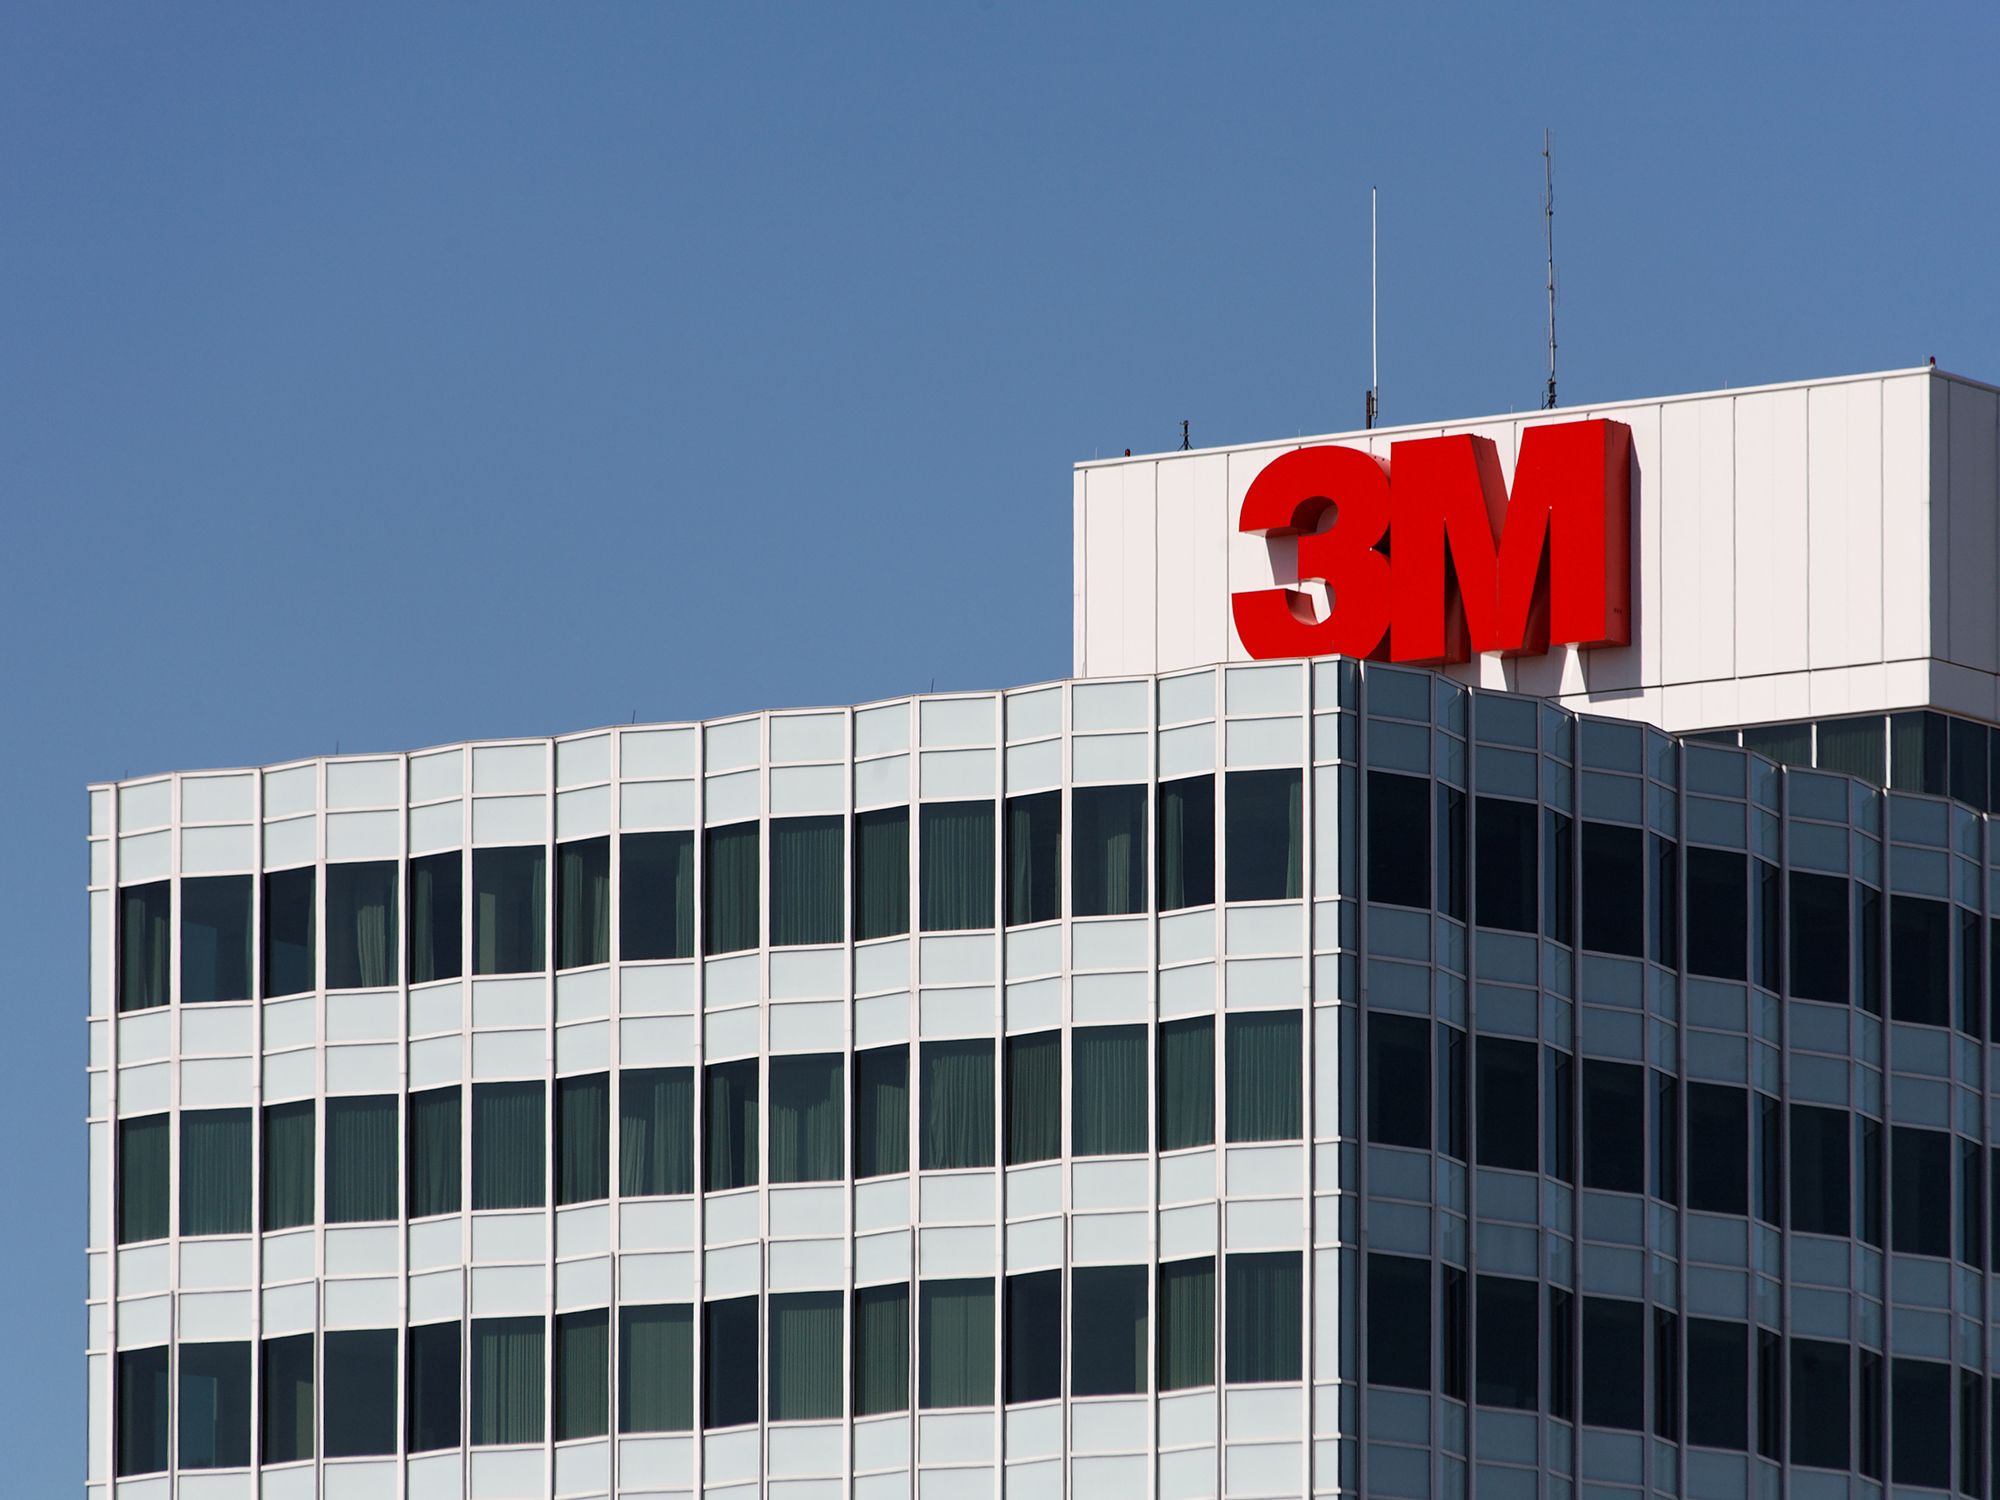 3M will stop making hazardous 'forever chemicals' starting in 2025